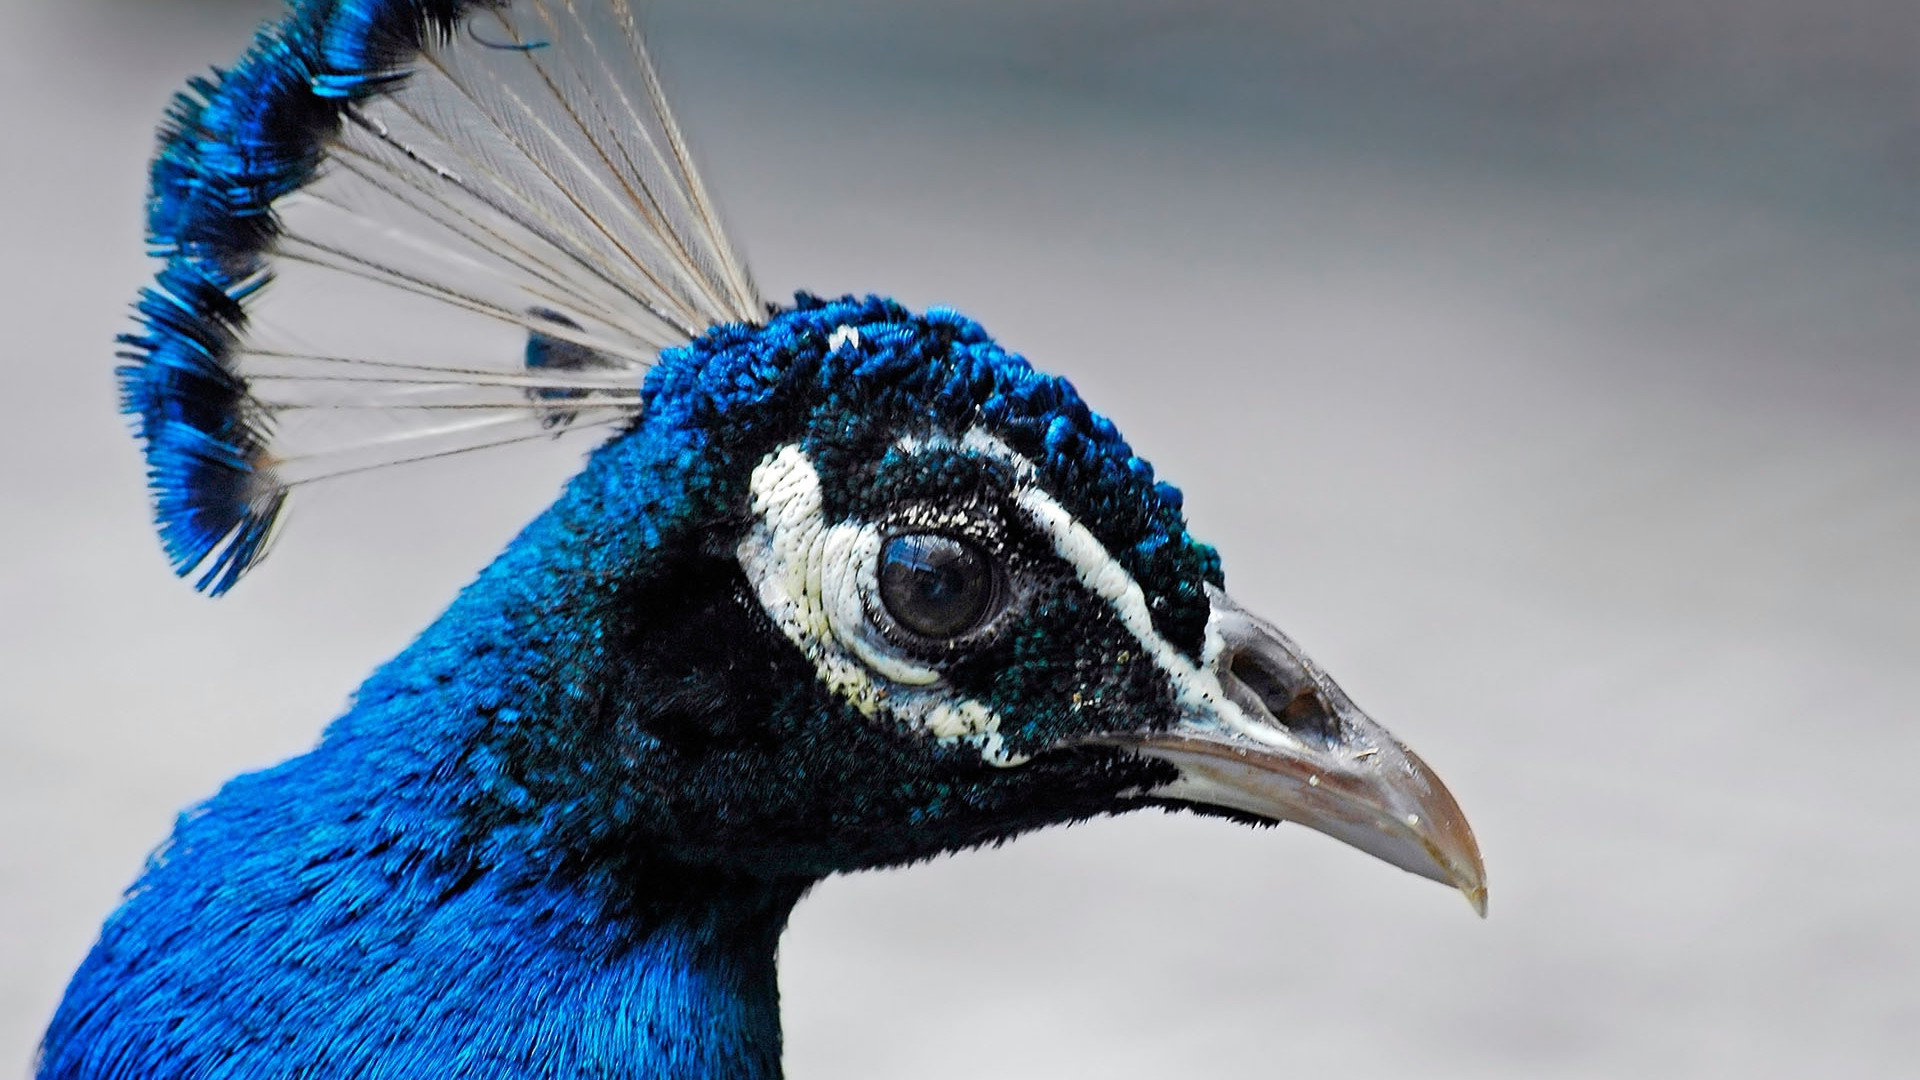 Download 1080p Peacock PC background ID:151810 for free